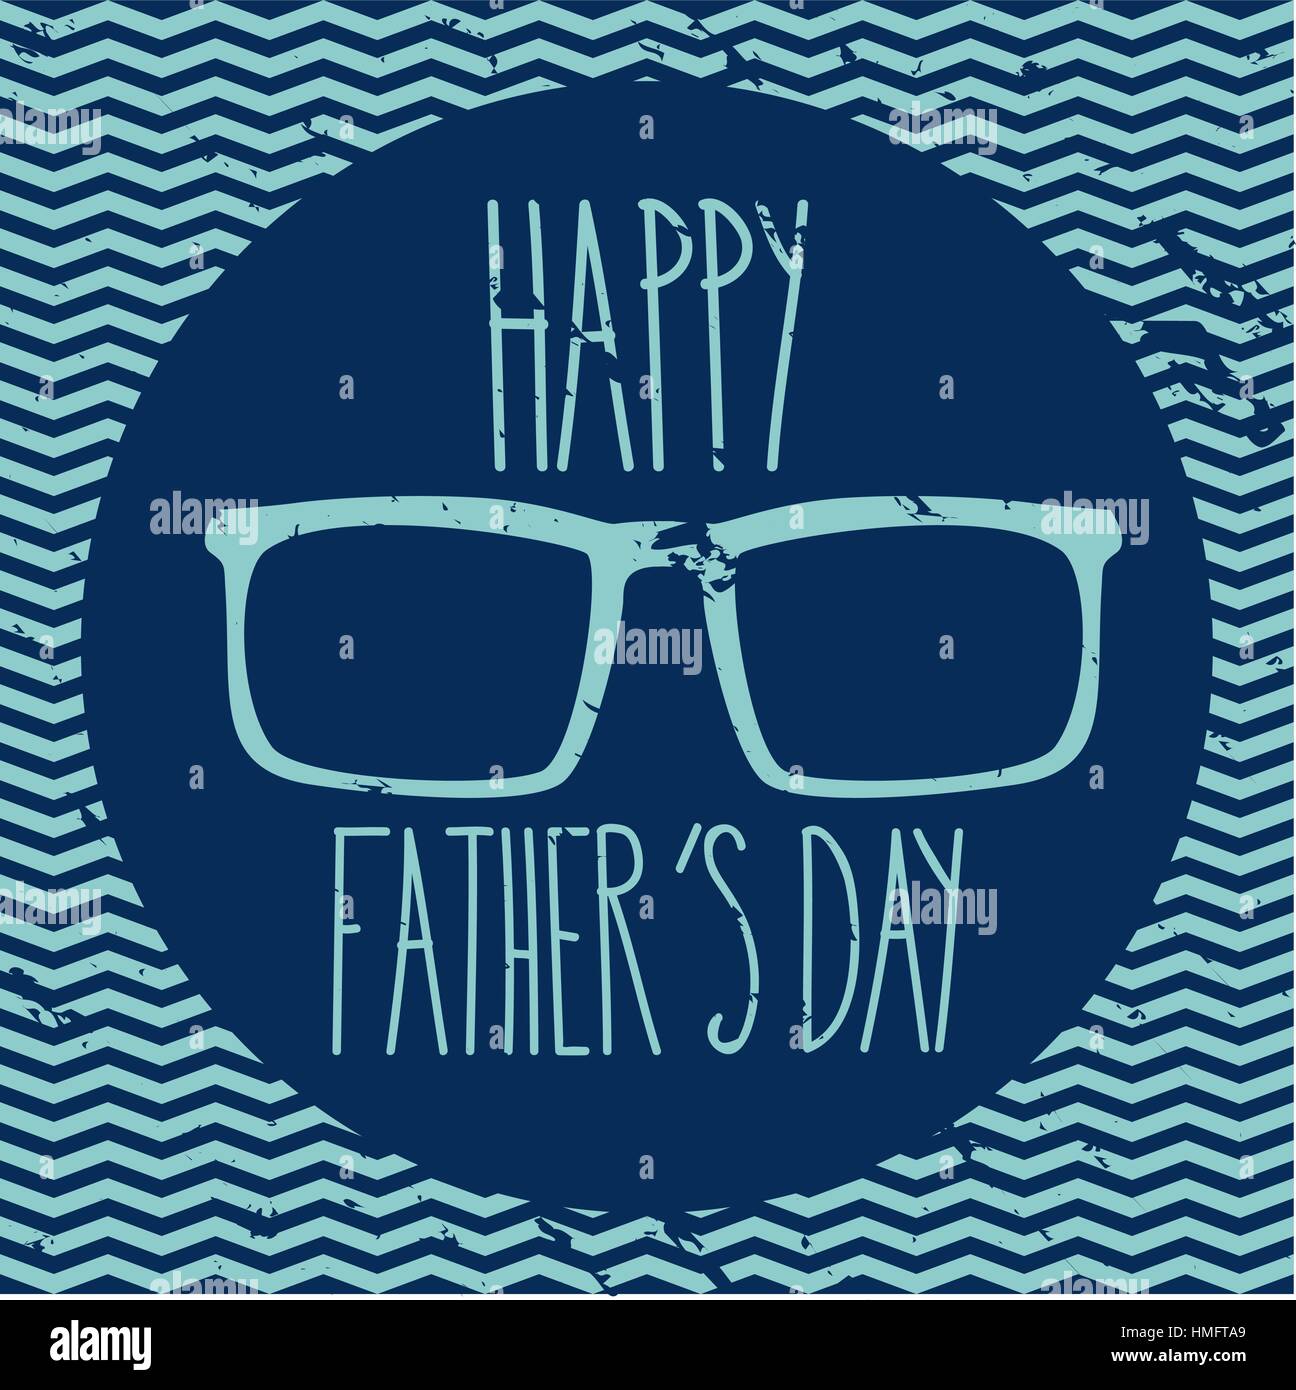 Happy Father's day card full vector elements Stock Vector